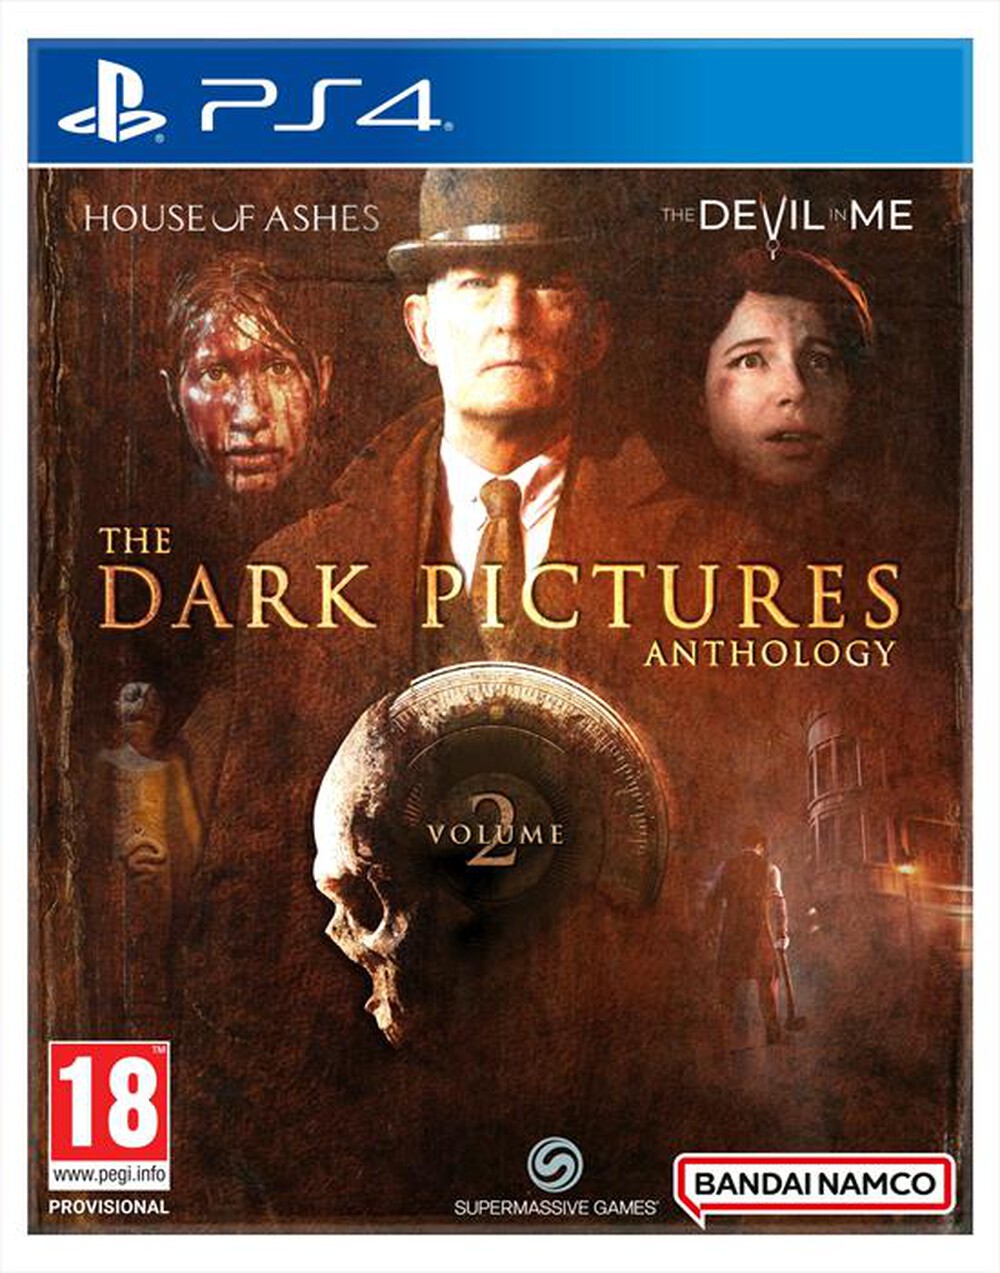 "NAMCO - THE DARK PICTURES ANTHOLOGY: VOLUME 2 PS4"